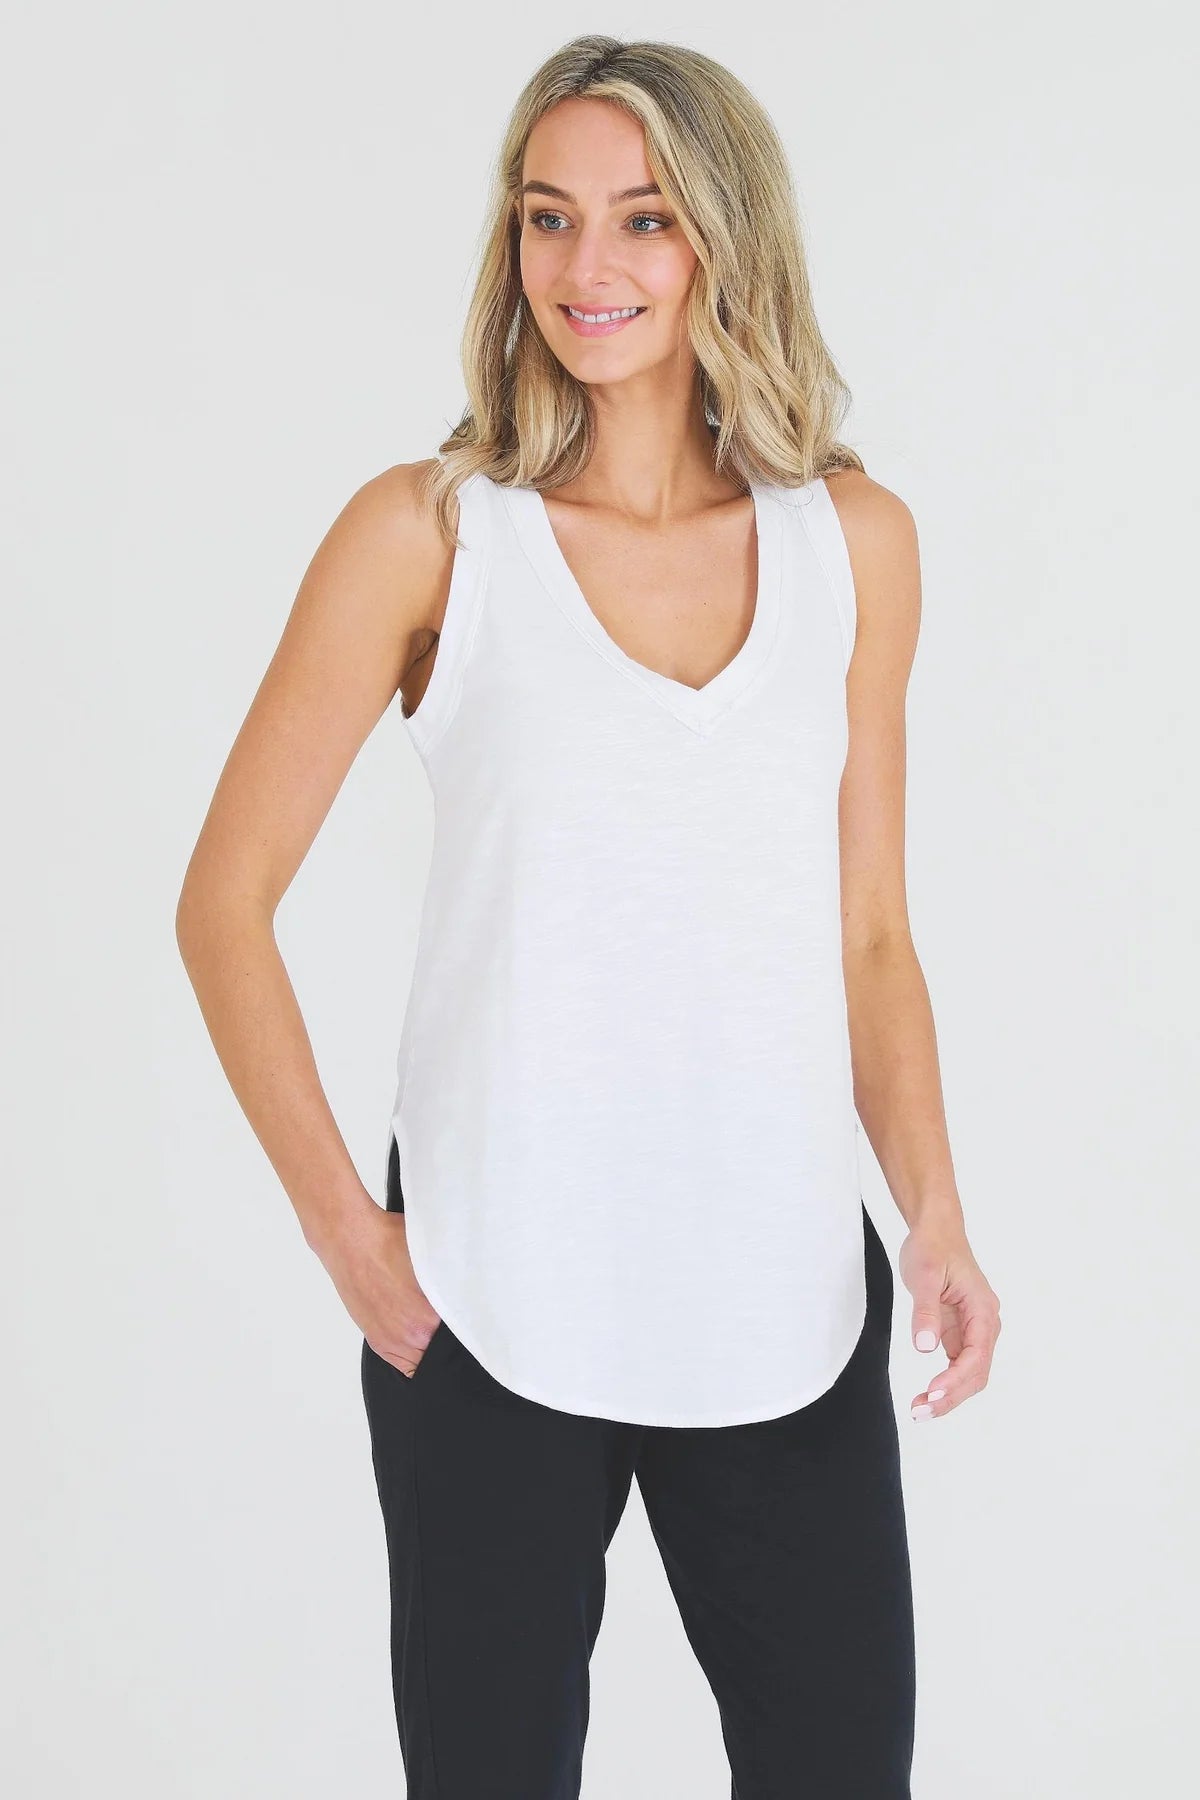 3rd Story - Audrey Tank in White